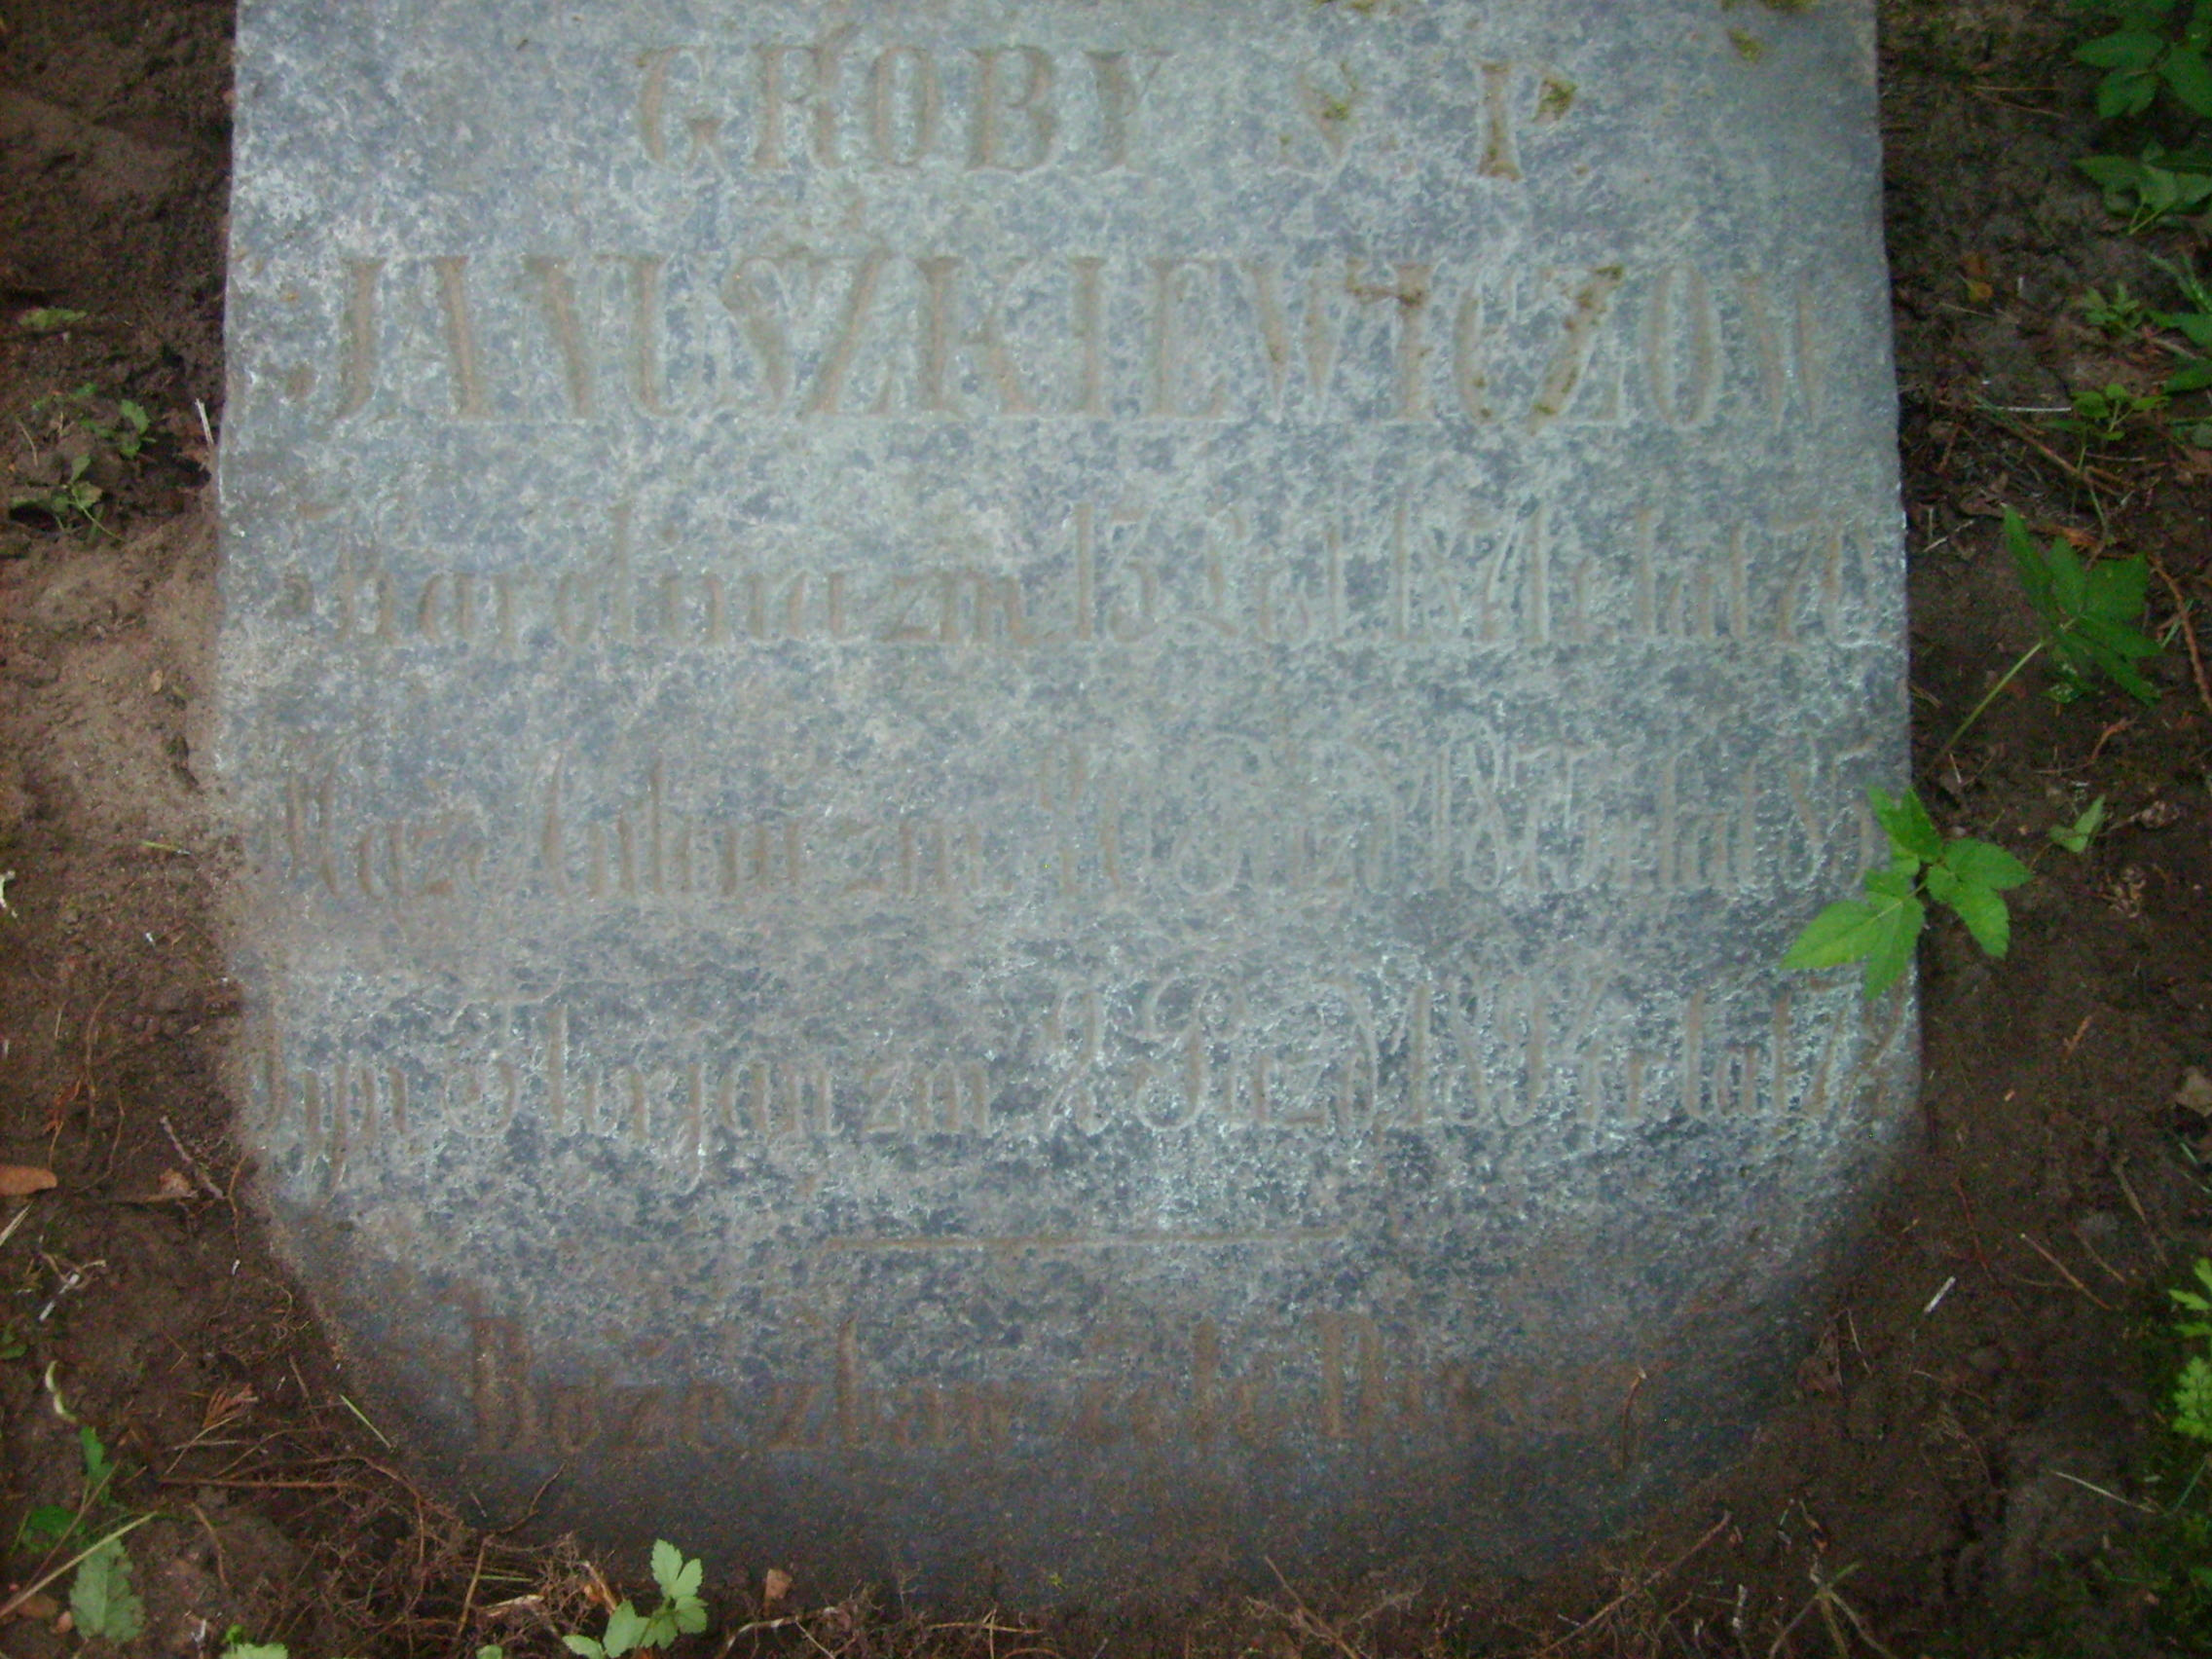 Inscription from the gravestone of the Januszkiewicz family, Na Rossie cemetery in Vilnius, as of 2013